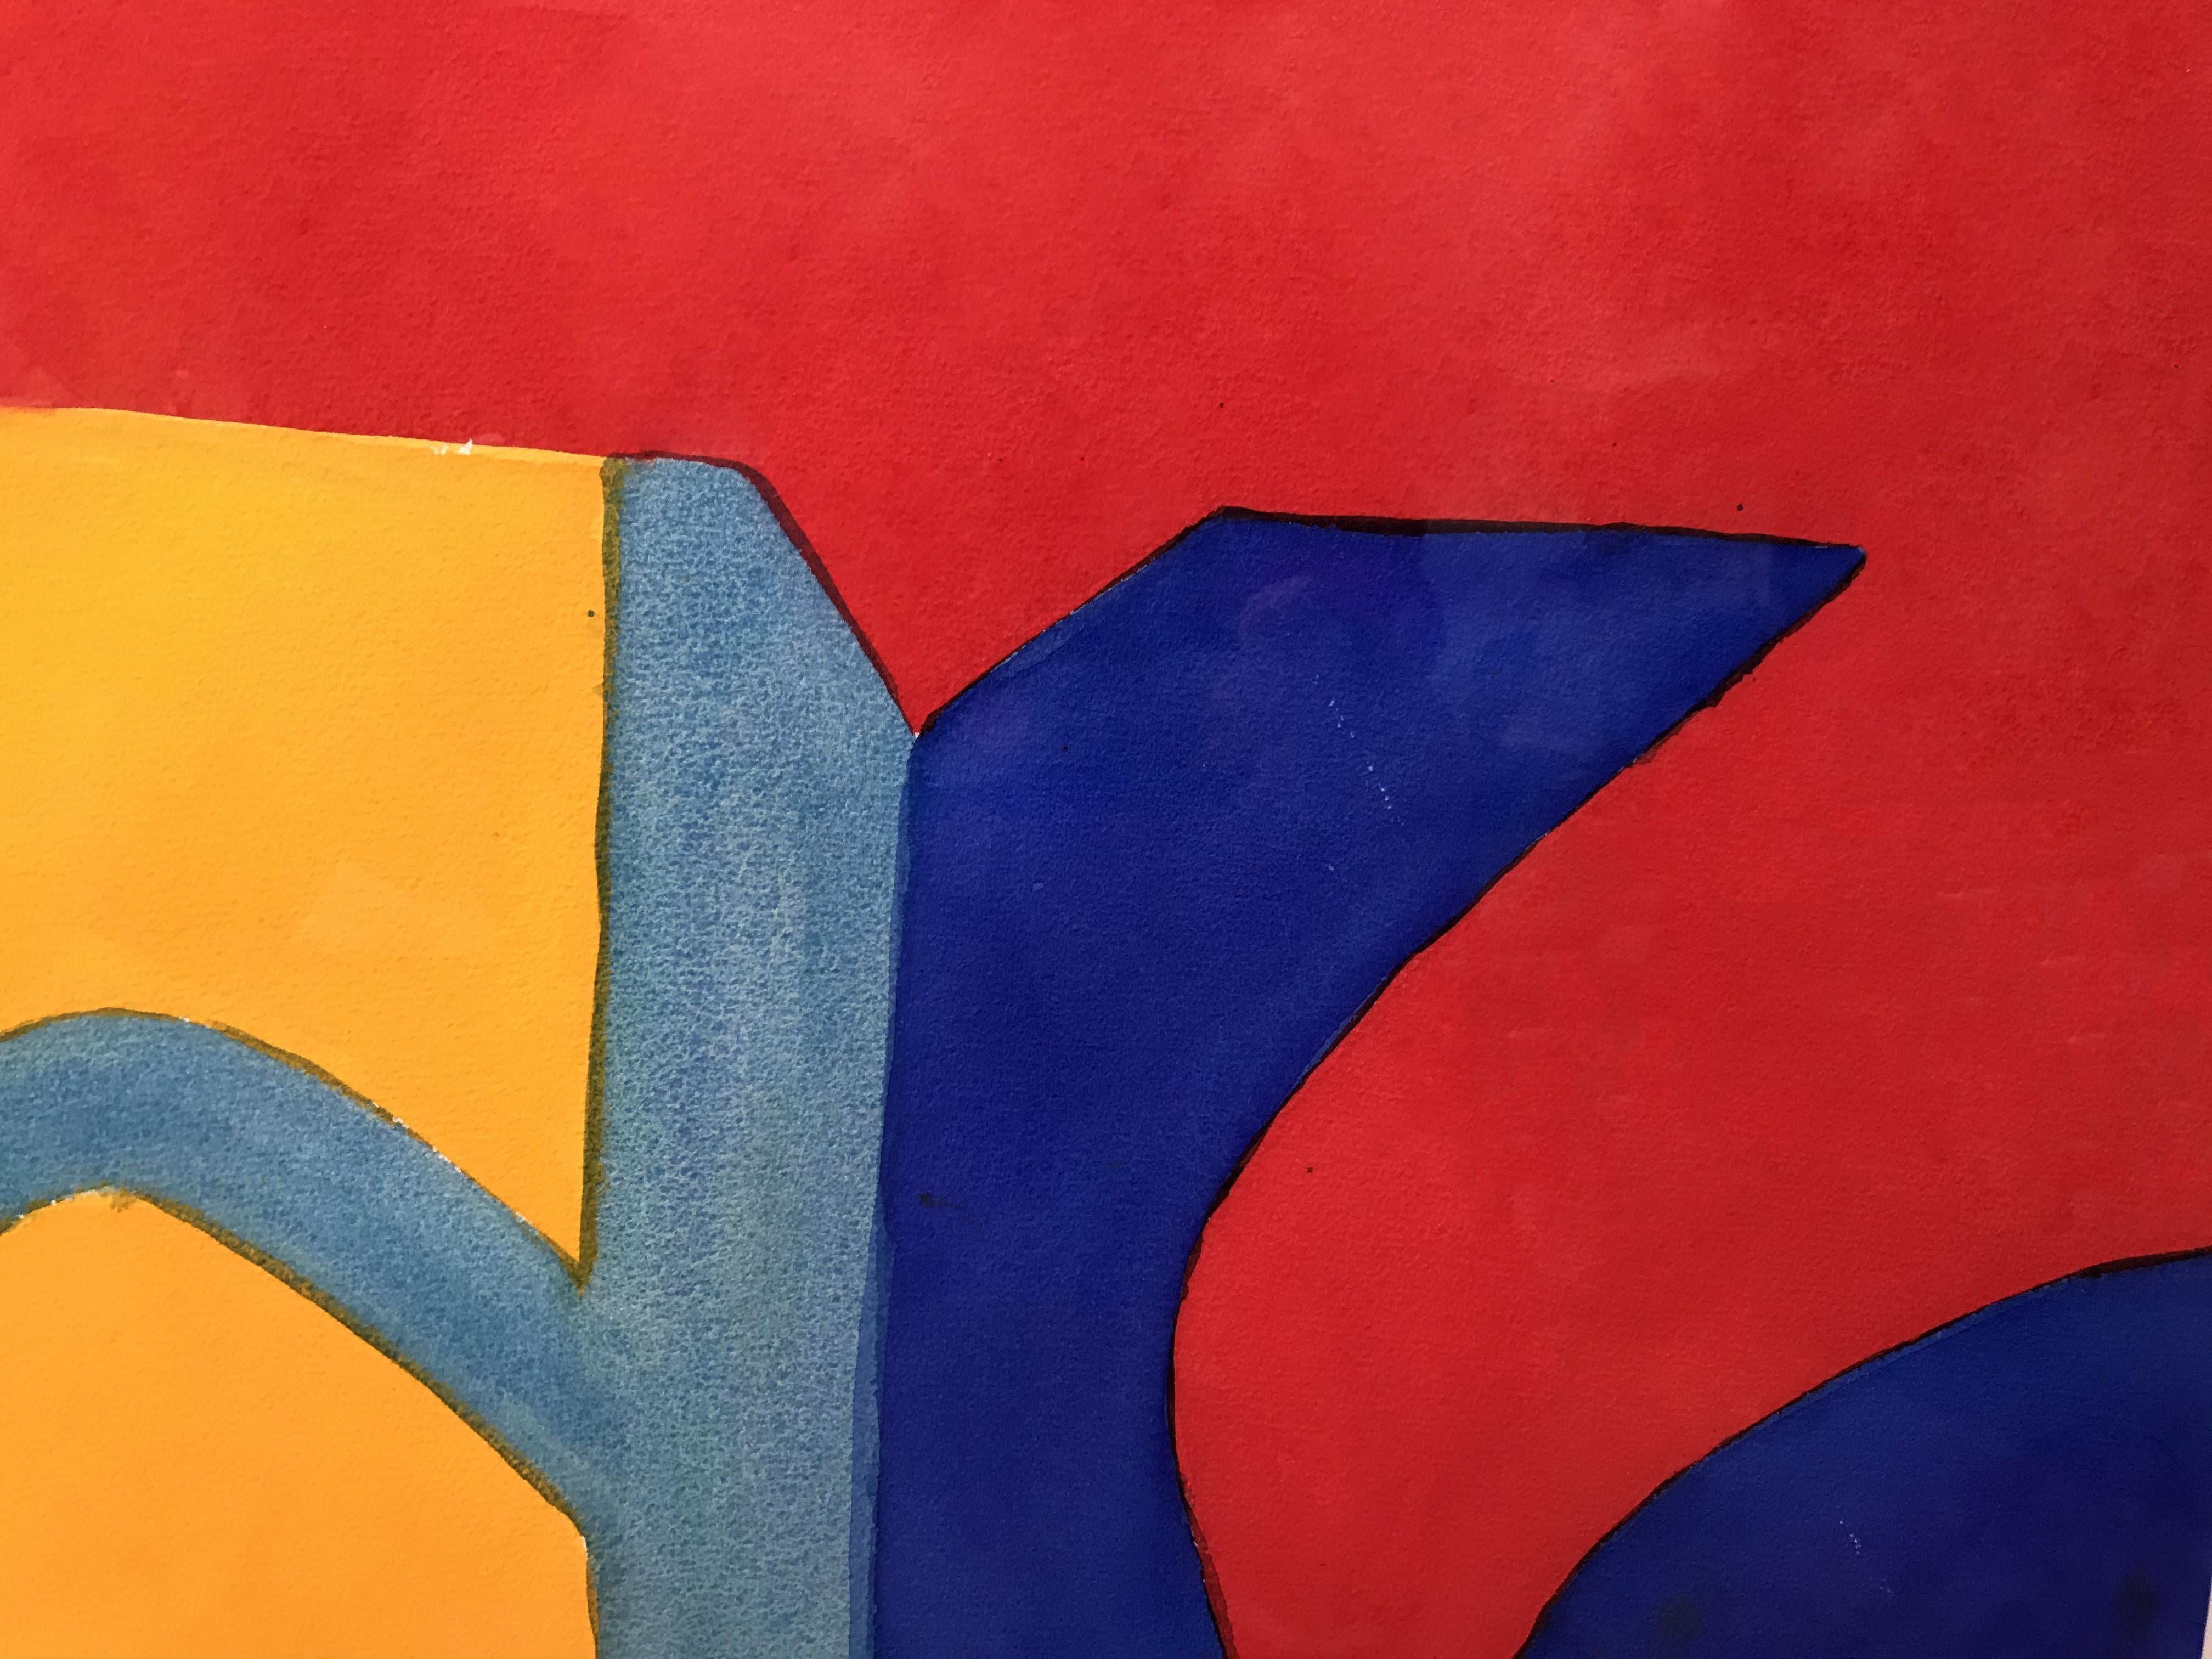 Vibrant abstract watercolor by Jae Carmichael (1925-2005) signed with her initials.
Jae Carmichael, painter, sculptor, photographer, writer, and independent filmmaker. She was founding director of Pasadena's Pacific Asia Museum. She staged more